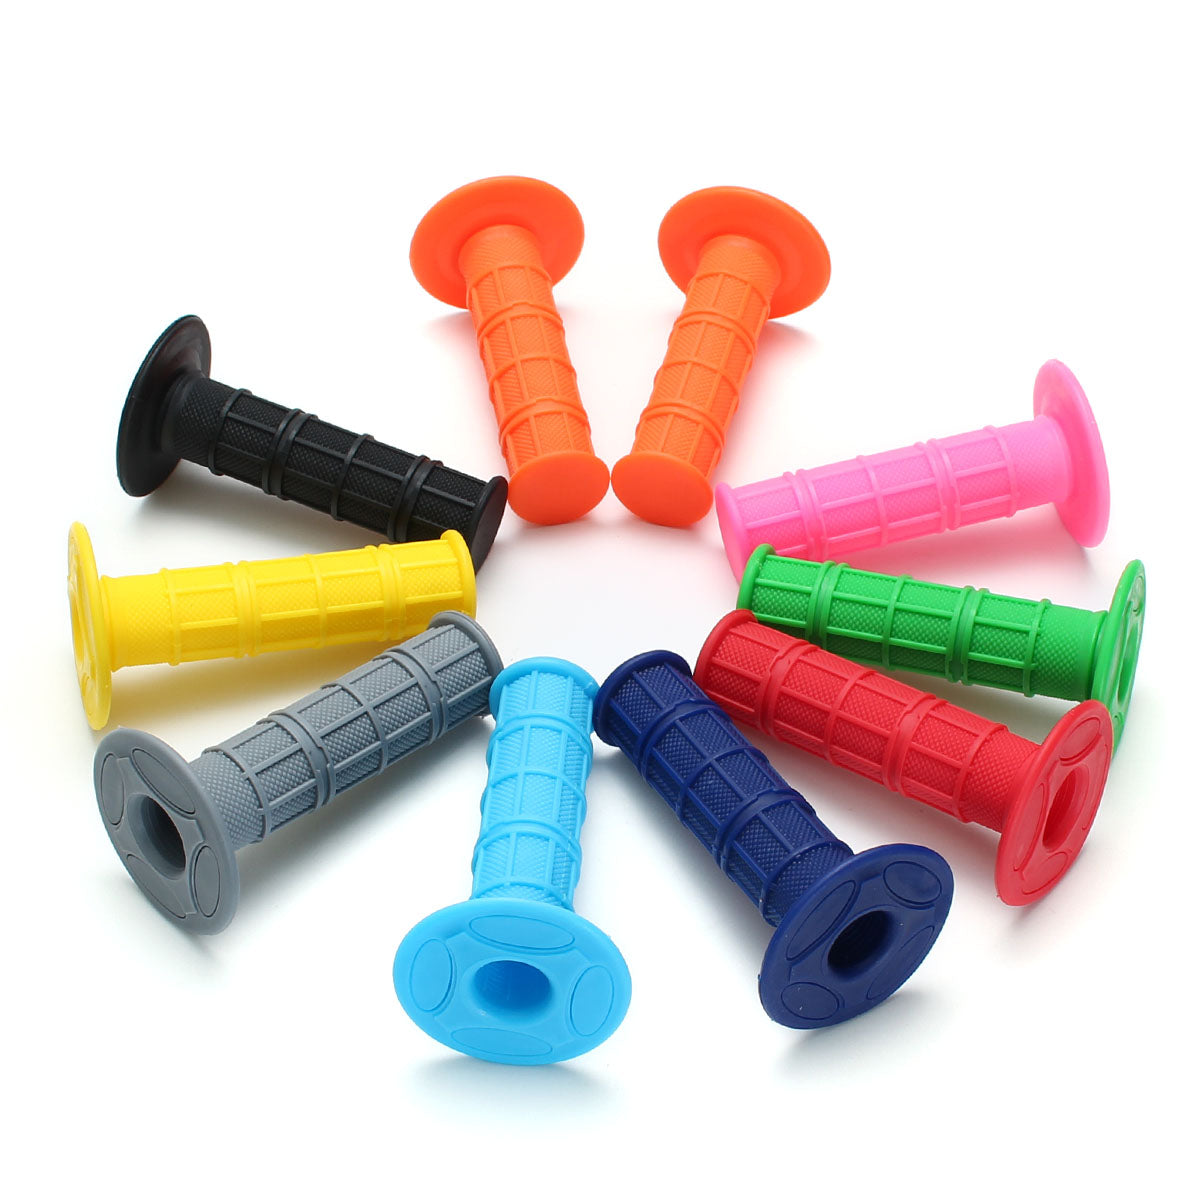 2pcs 7/8 Inch 22mm 9 Color Motorcycle Rubber Handlebar Grip For CRF/YZF/WRF/KXF/KLX/RMZ - Auto GoShop